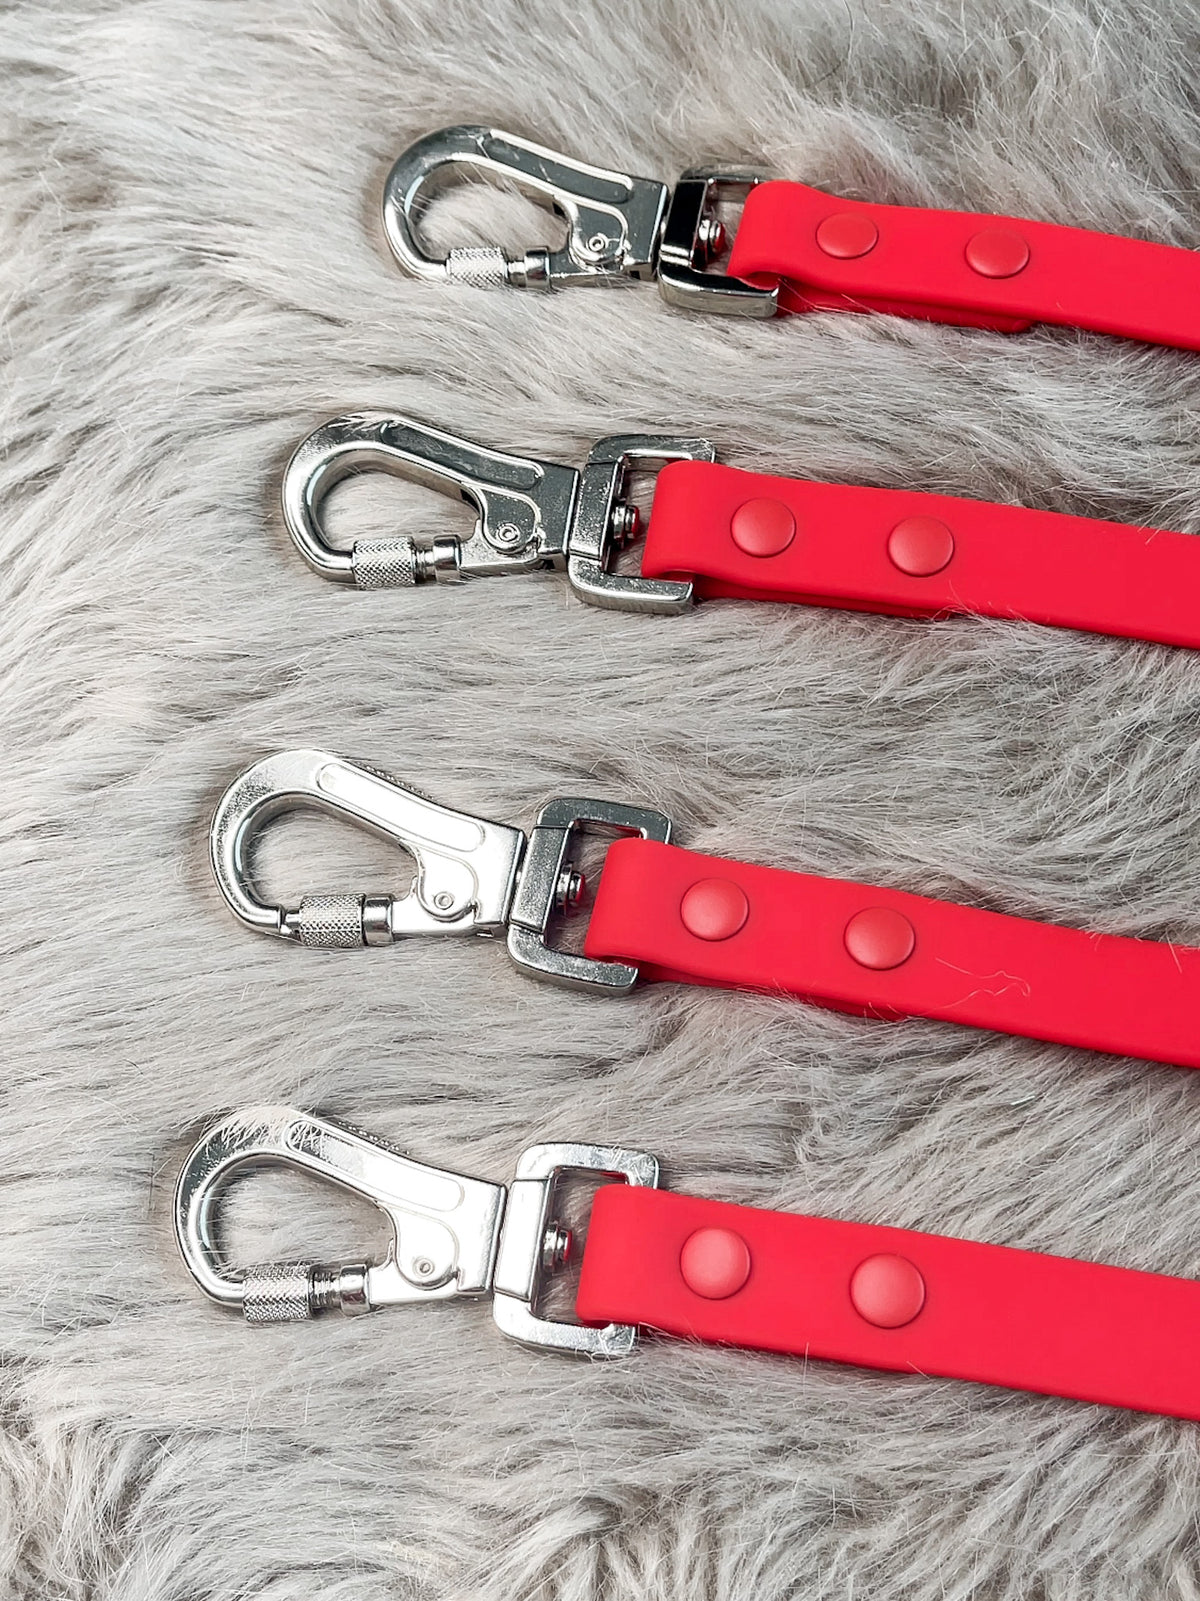 red dog leash, dog leash with locking clip, waterproof dog leashes